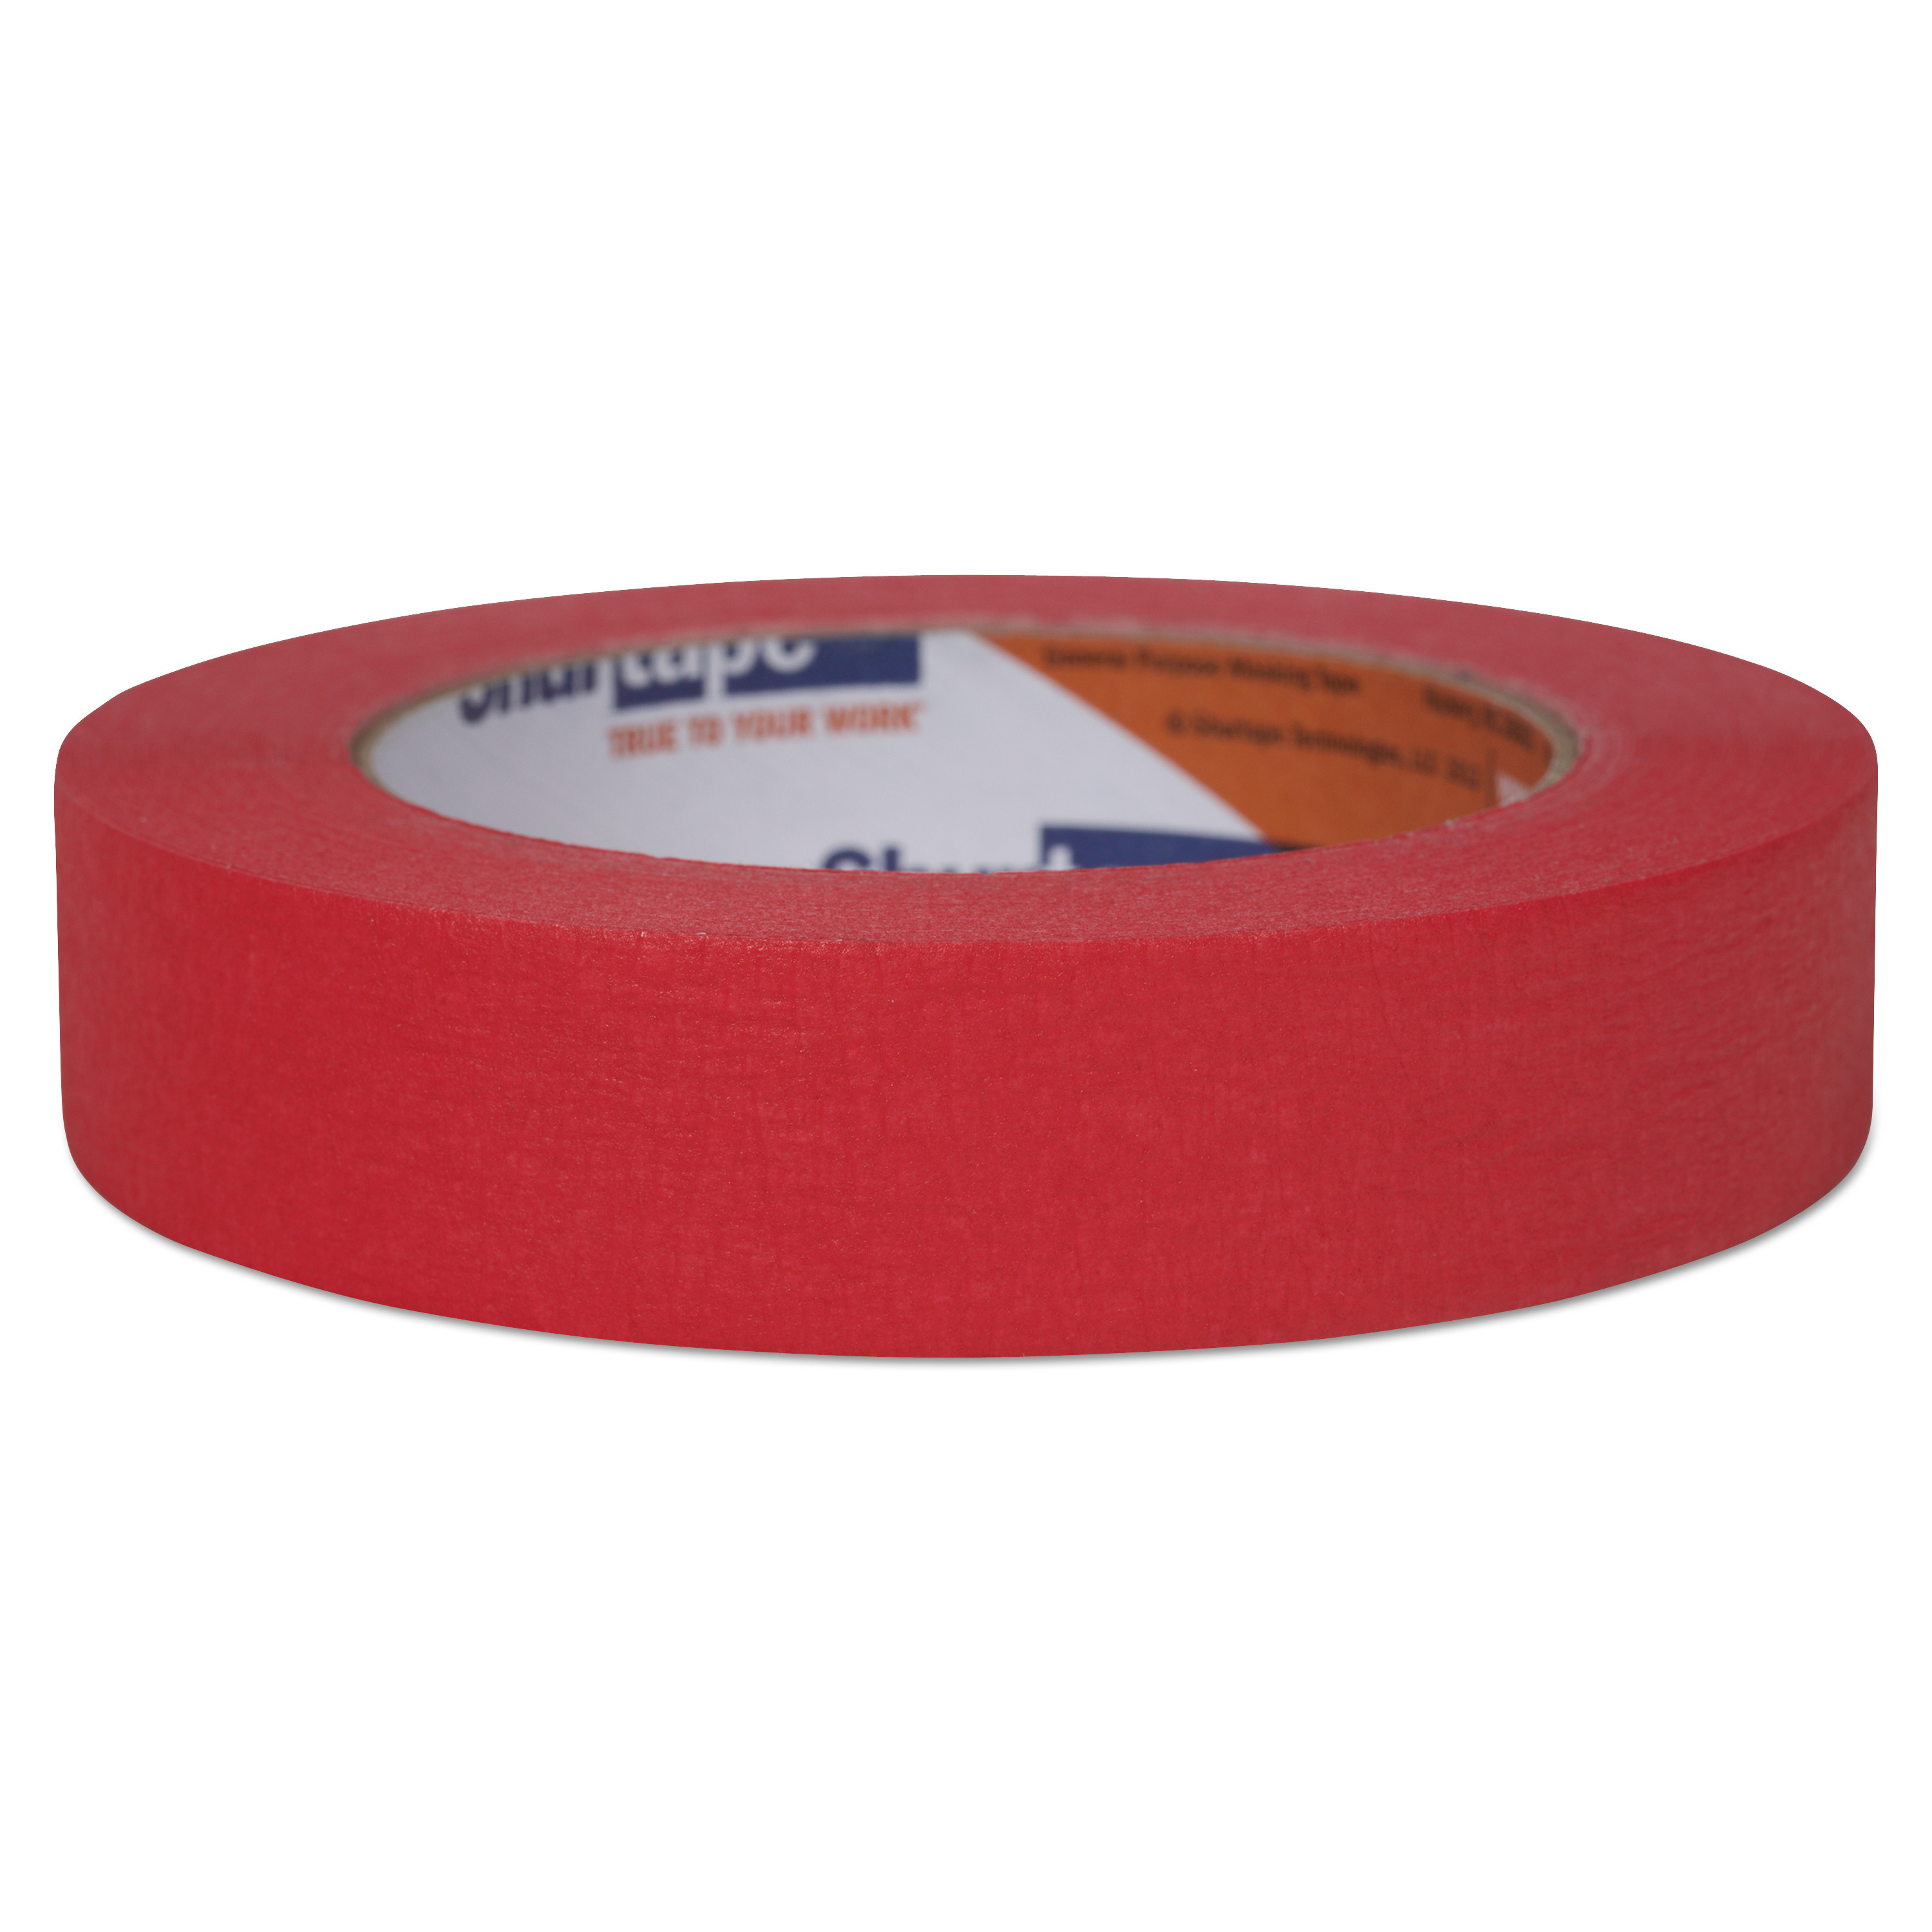  COHEALI Seamless Tape 5 Pcs Colorful Tape Color Tape Ktape Glue  Tape Goon Tape Colorful Masking Tape Colored Duct Tape Water Proof Tape  Waterproof Tape Textured Paper Student Label : Arts